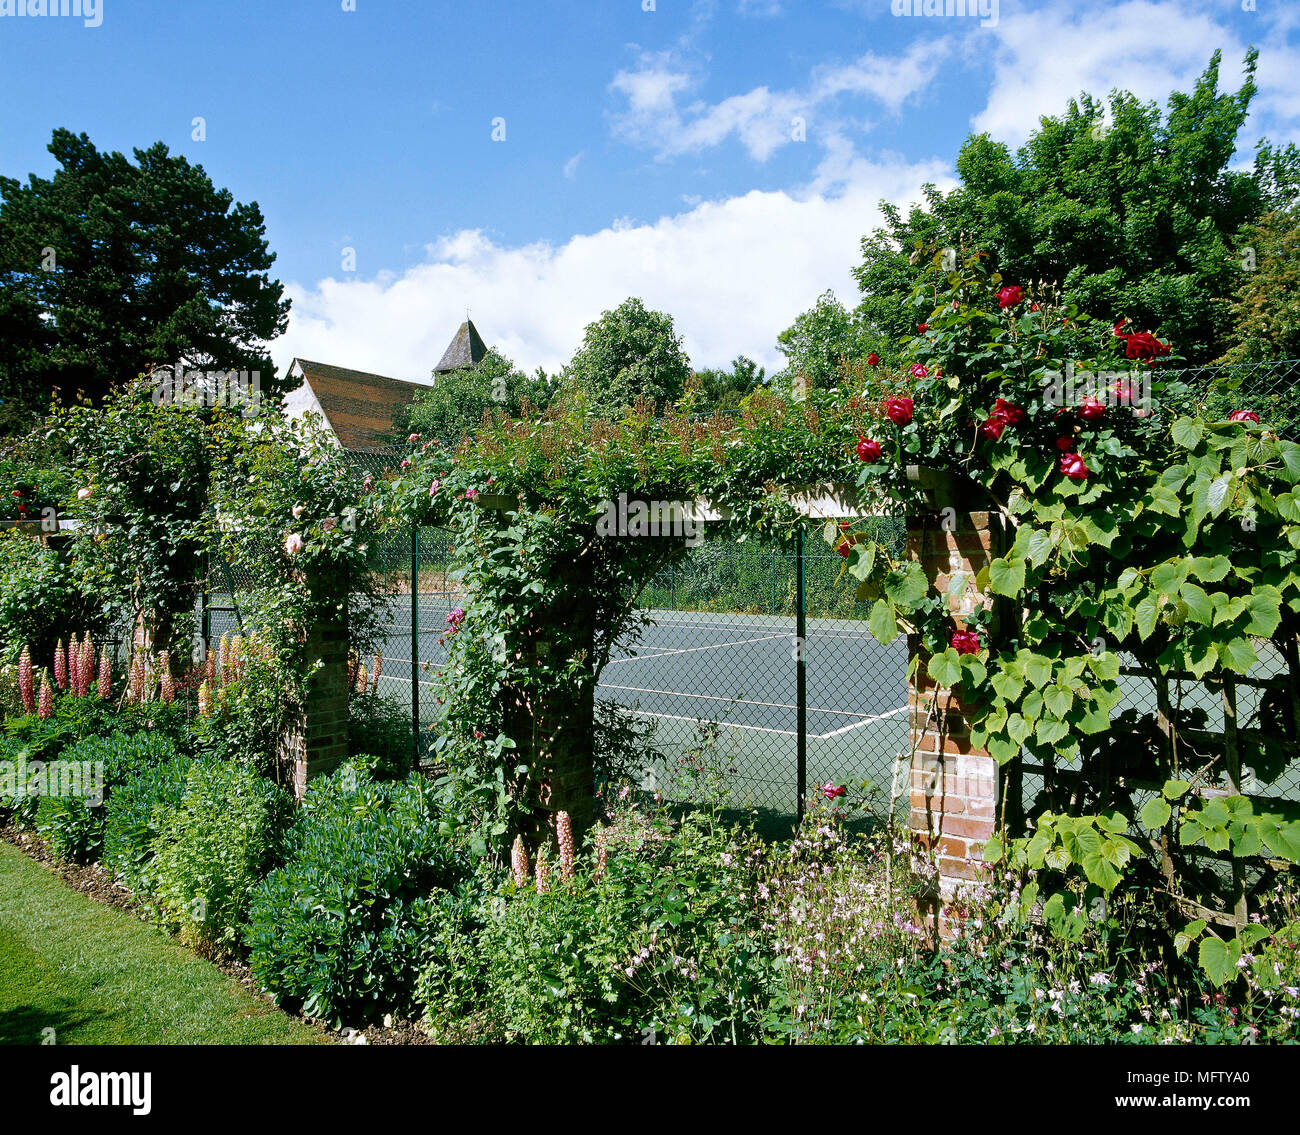 An outdoor tennis court surrounded by wire fencing, climbers and flower borders, Stock Photo